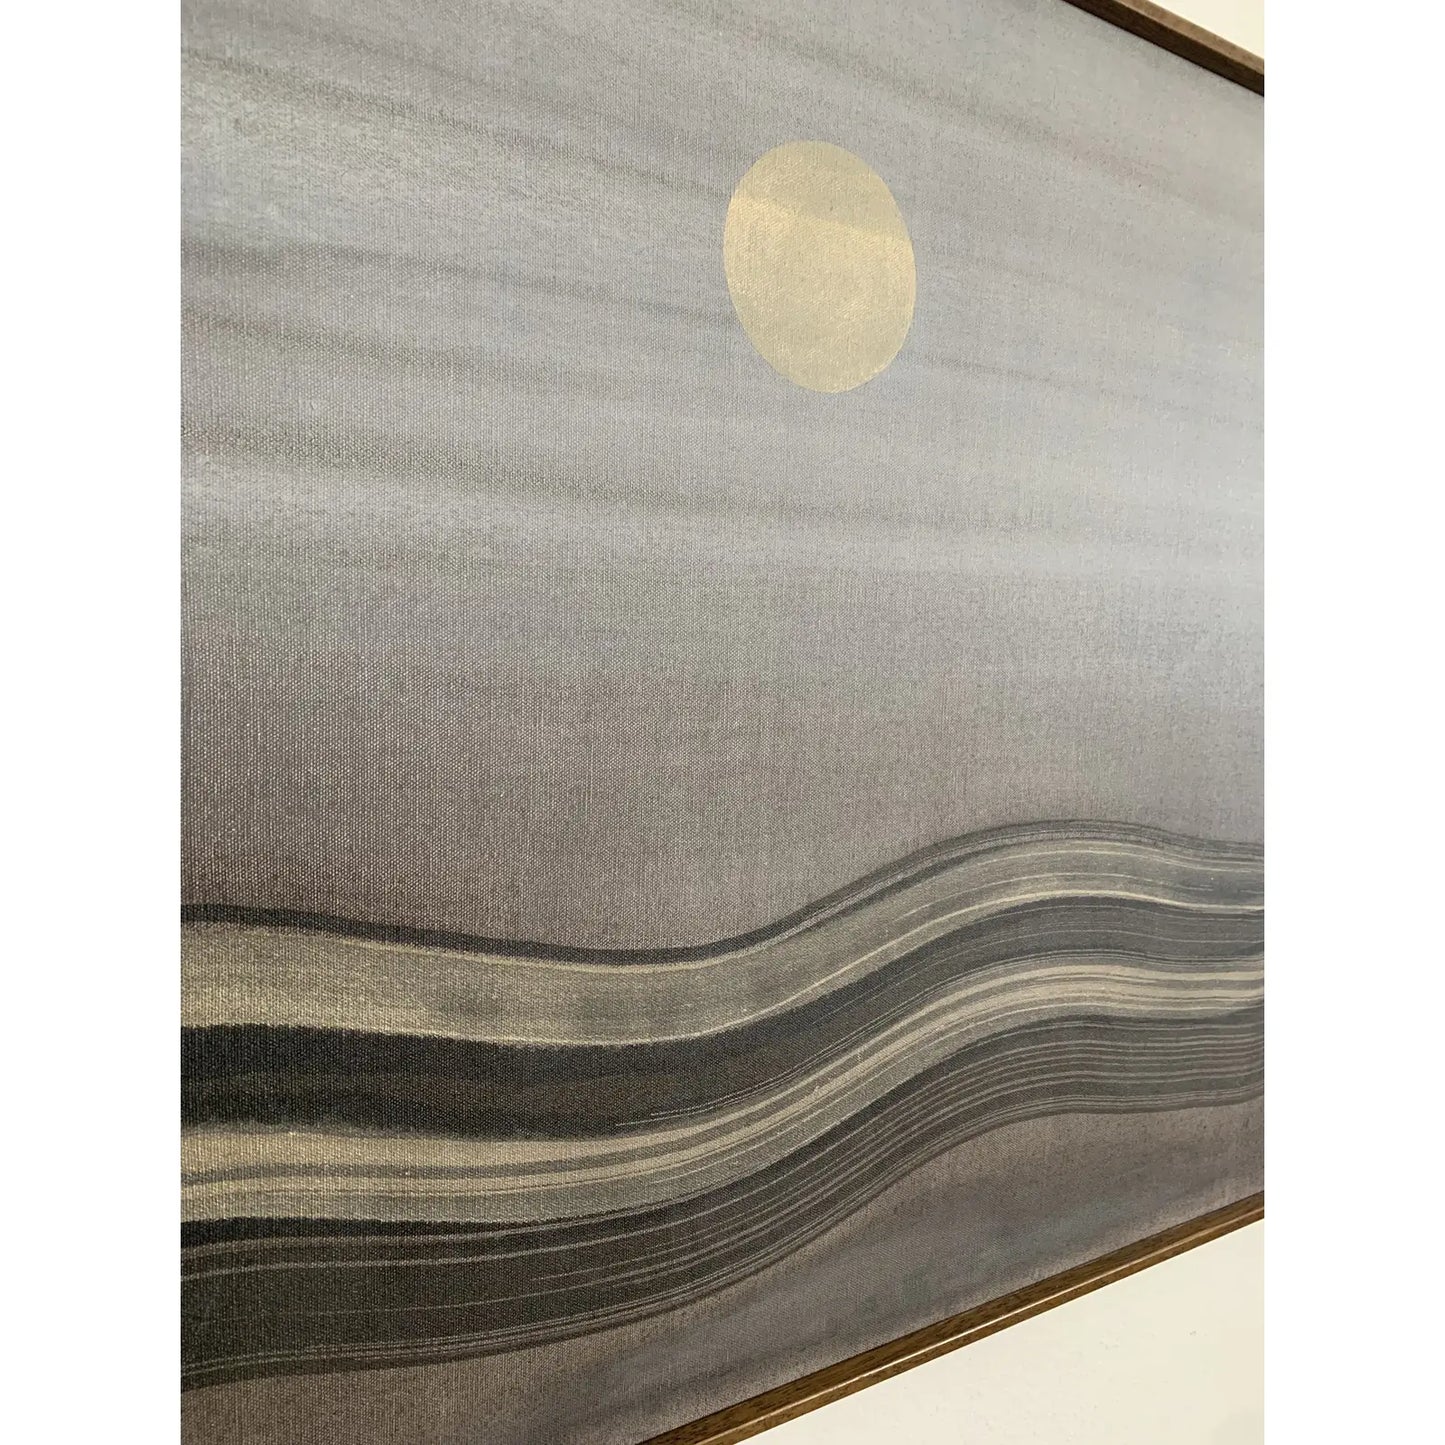 Signed 1975 Painting by James Farr Movement of River Reflecting Golden Nocturnal Moonlight